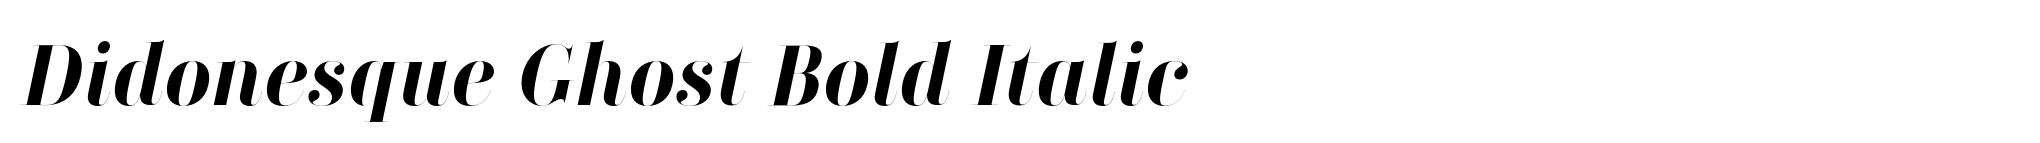 Didonesque Ghost Bold Italic image